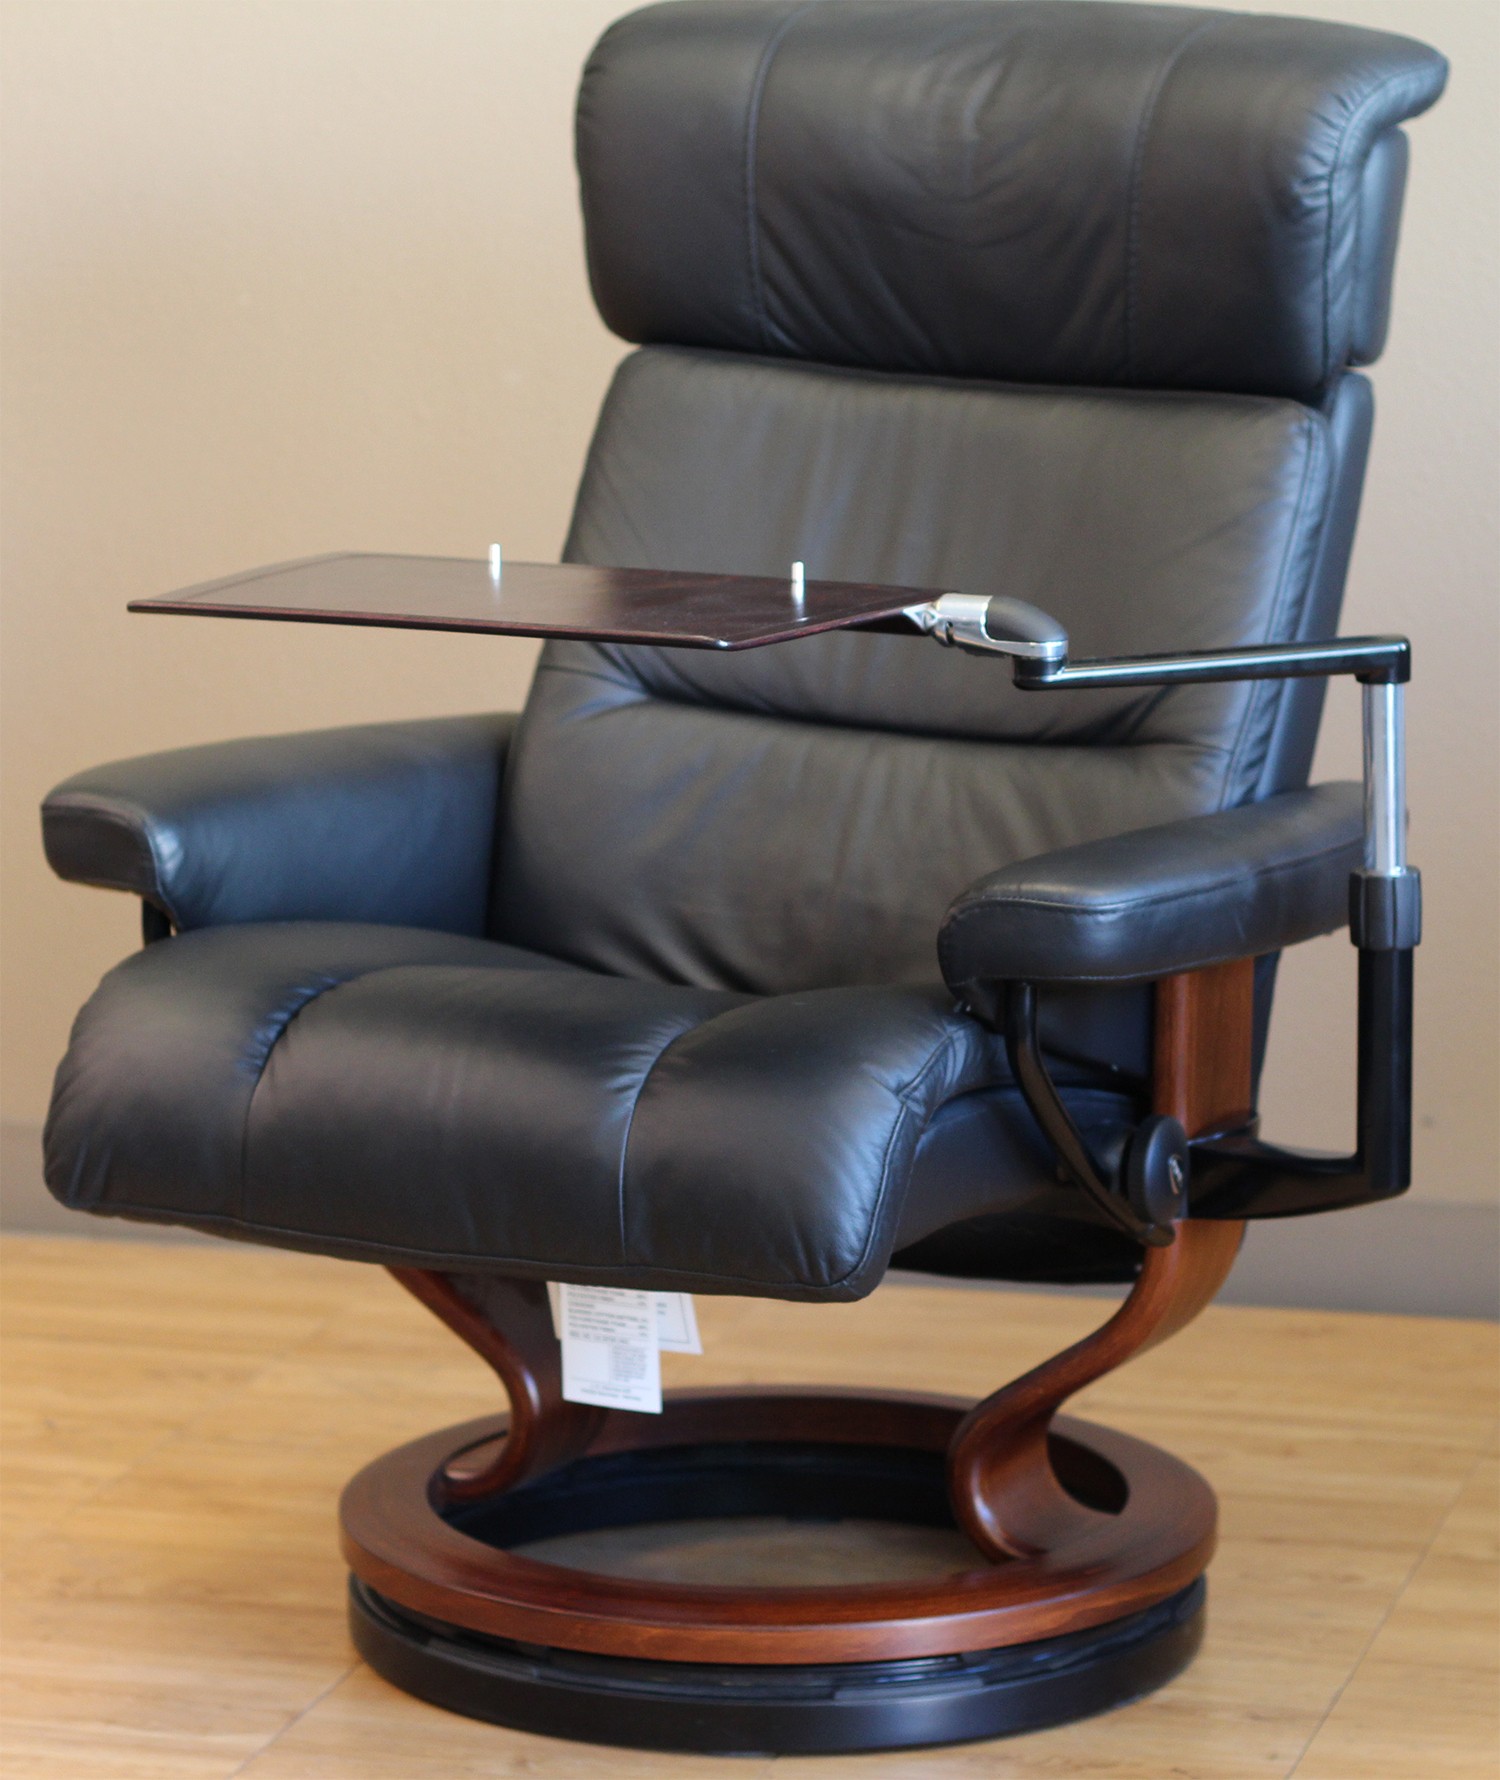 Stressless Recliner Personal Computer Laptop Table For 2 